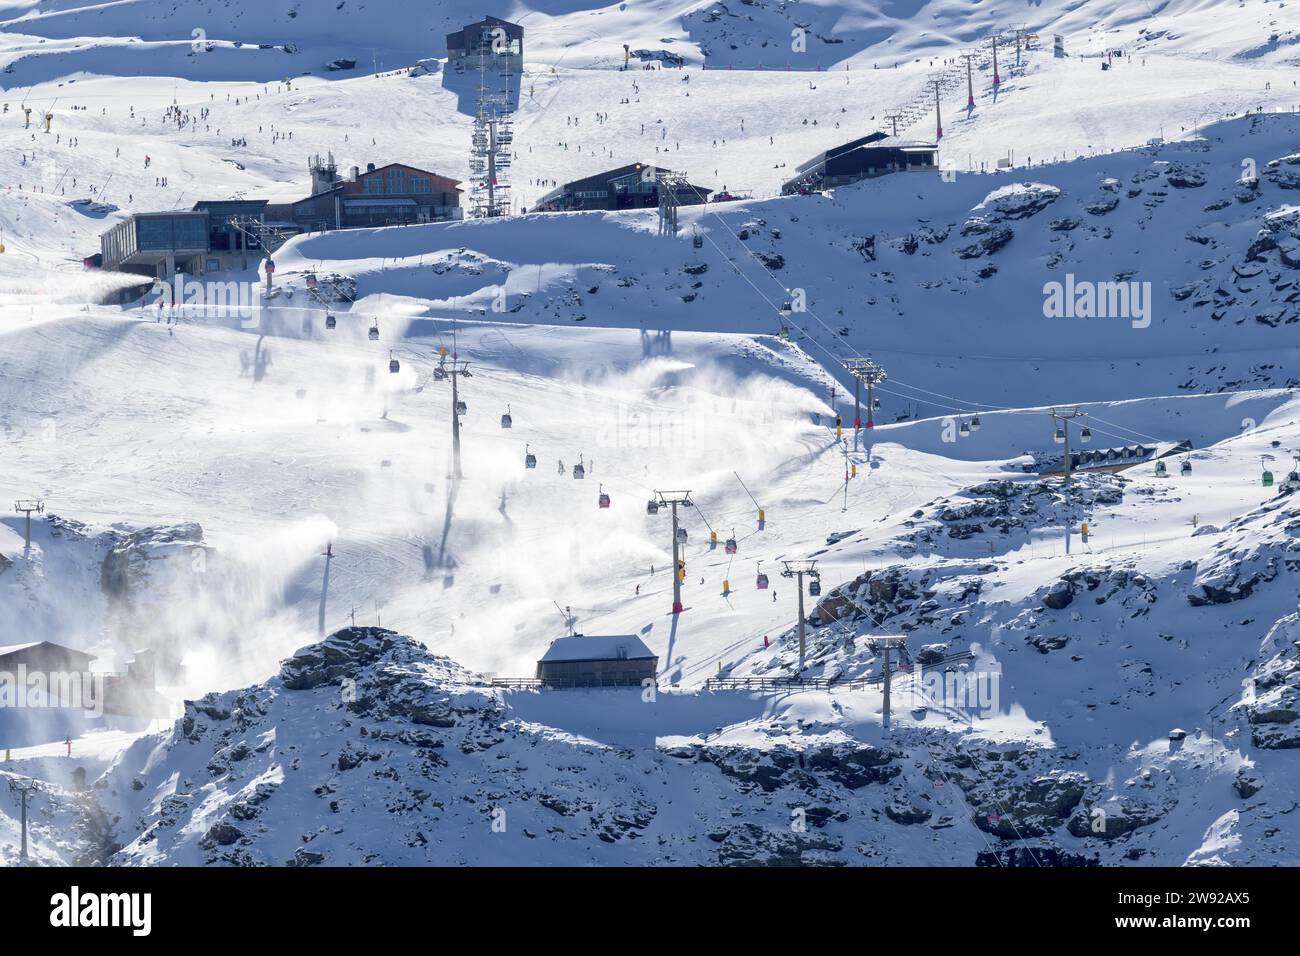 Snow-covered ski resort with active ski lifts in a mountainous alpine region Stock Photo